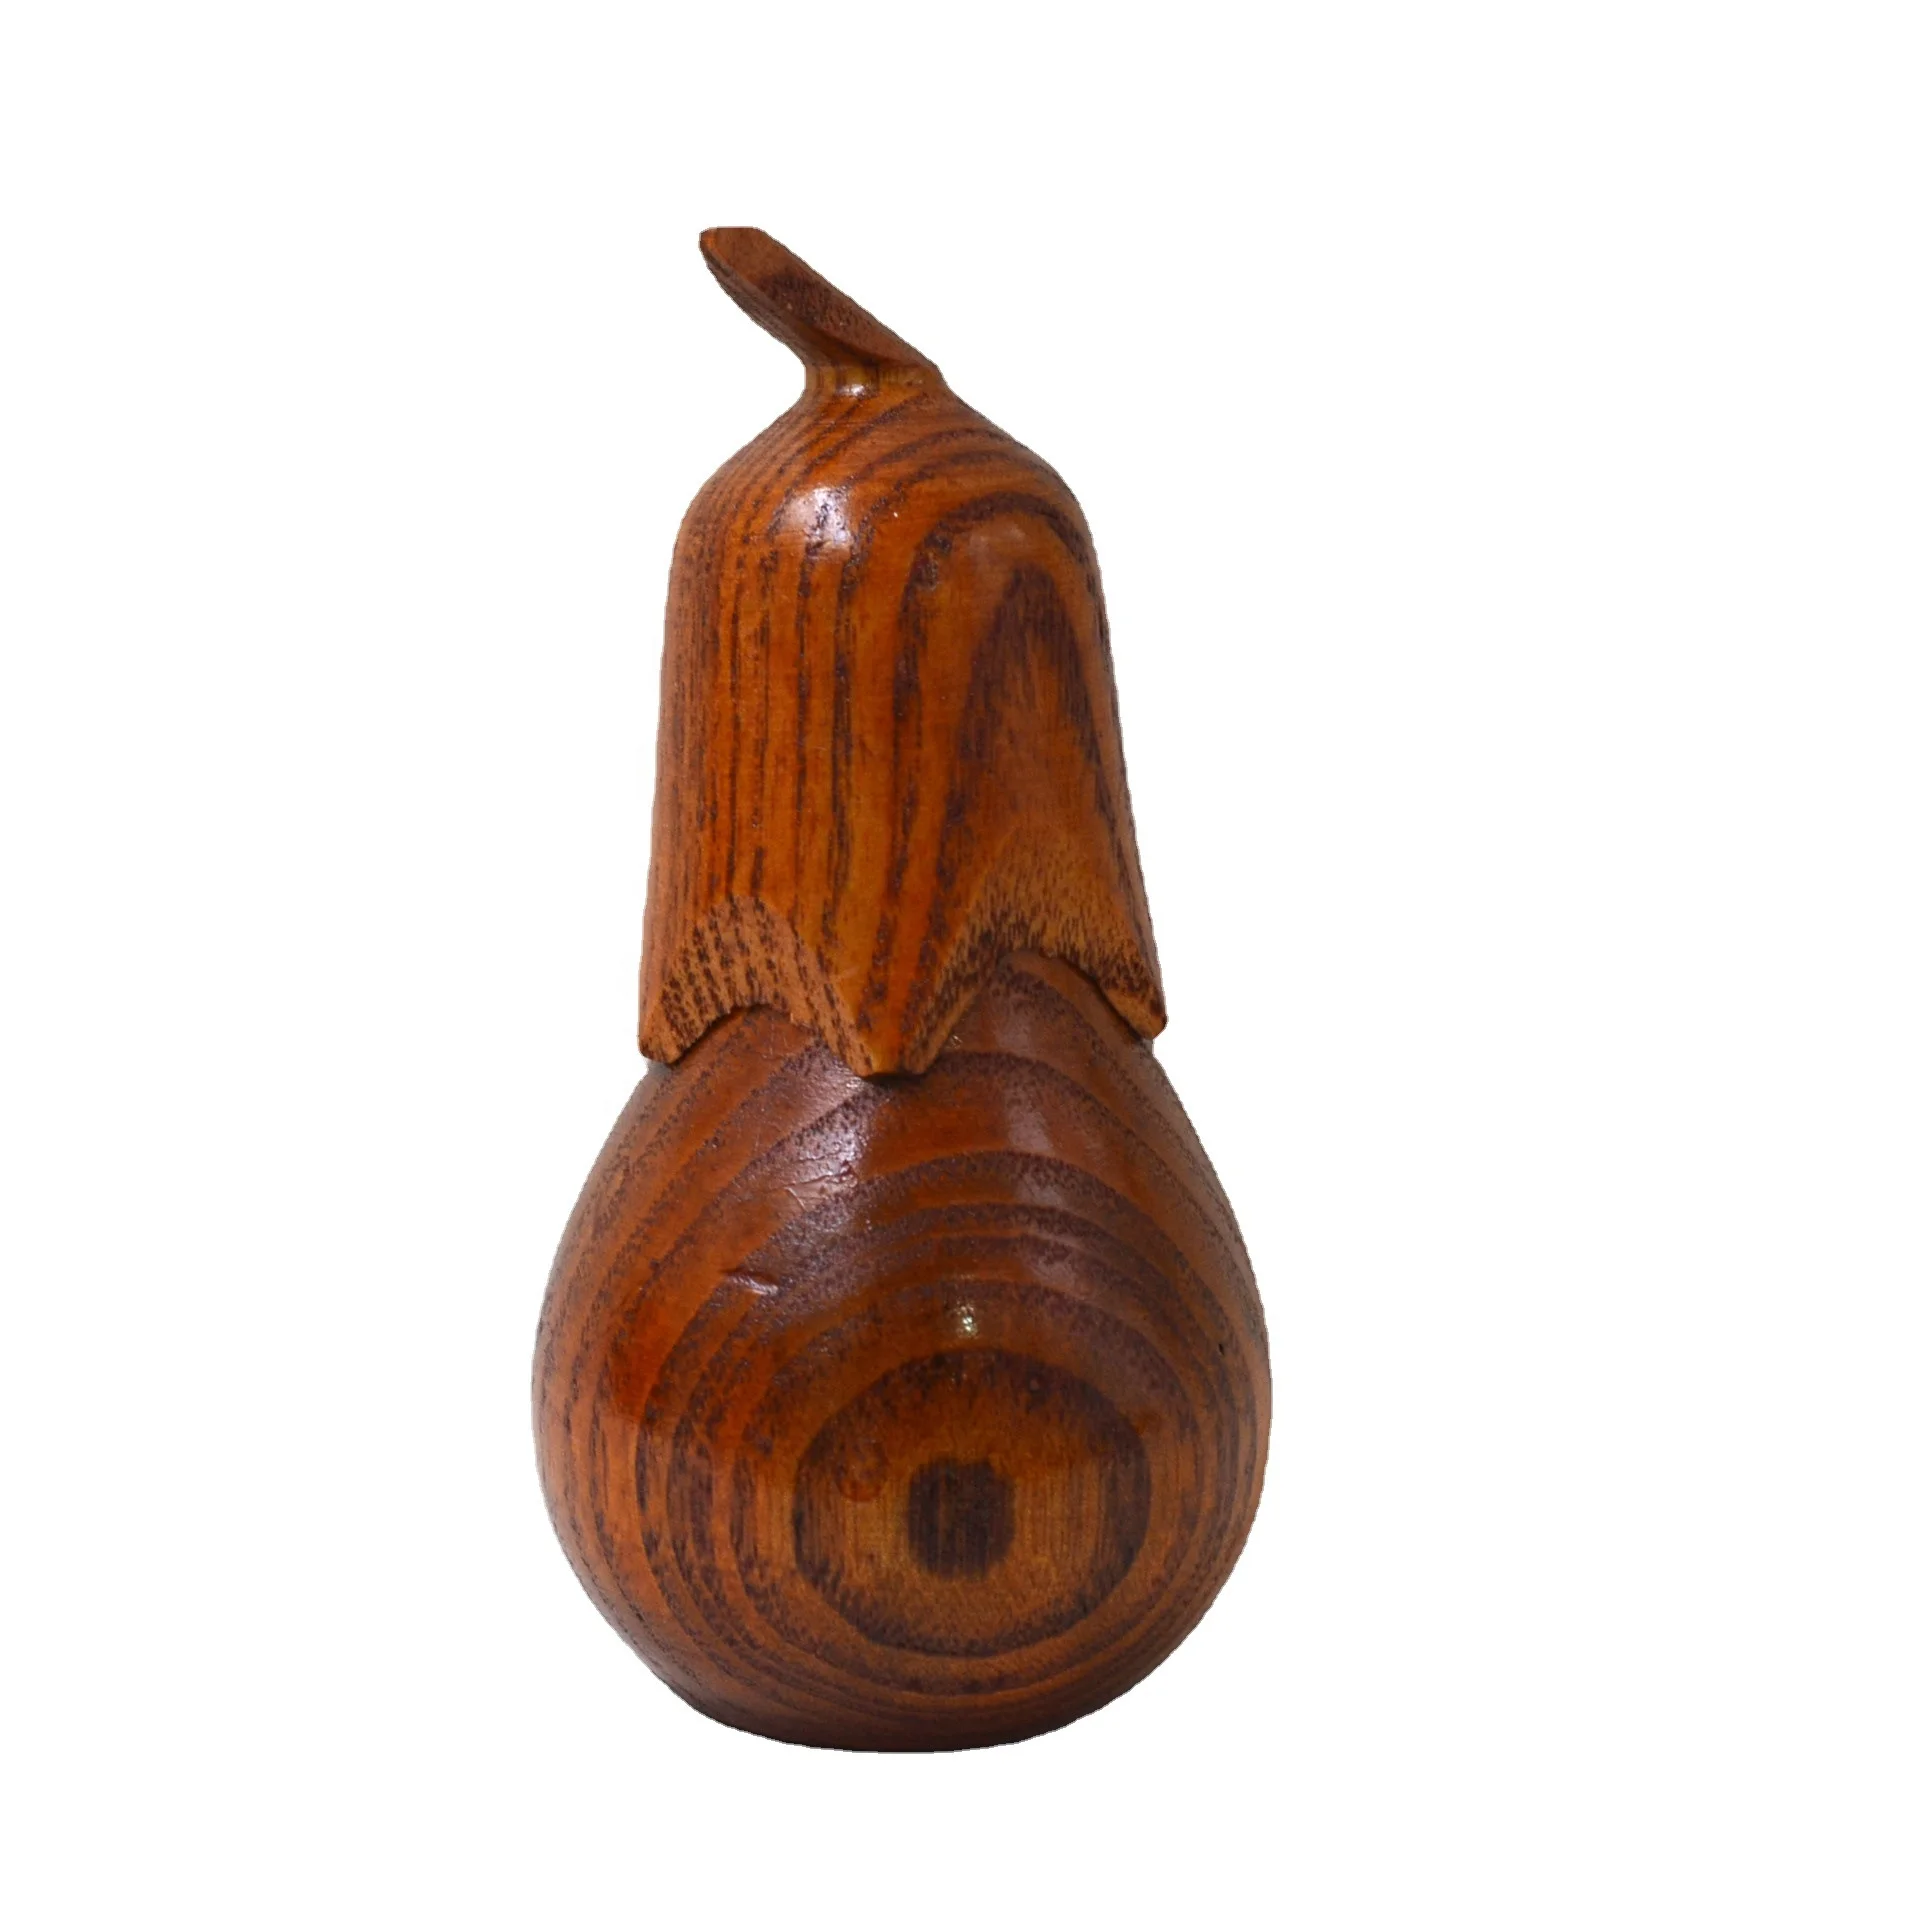 jujube wood Table Toothpick Dispenser Holder Container Box